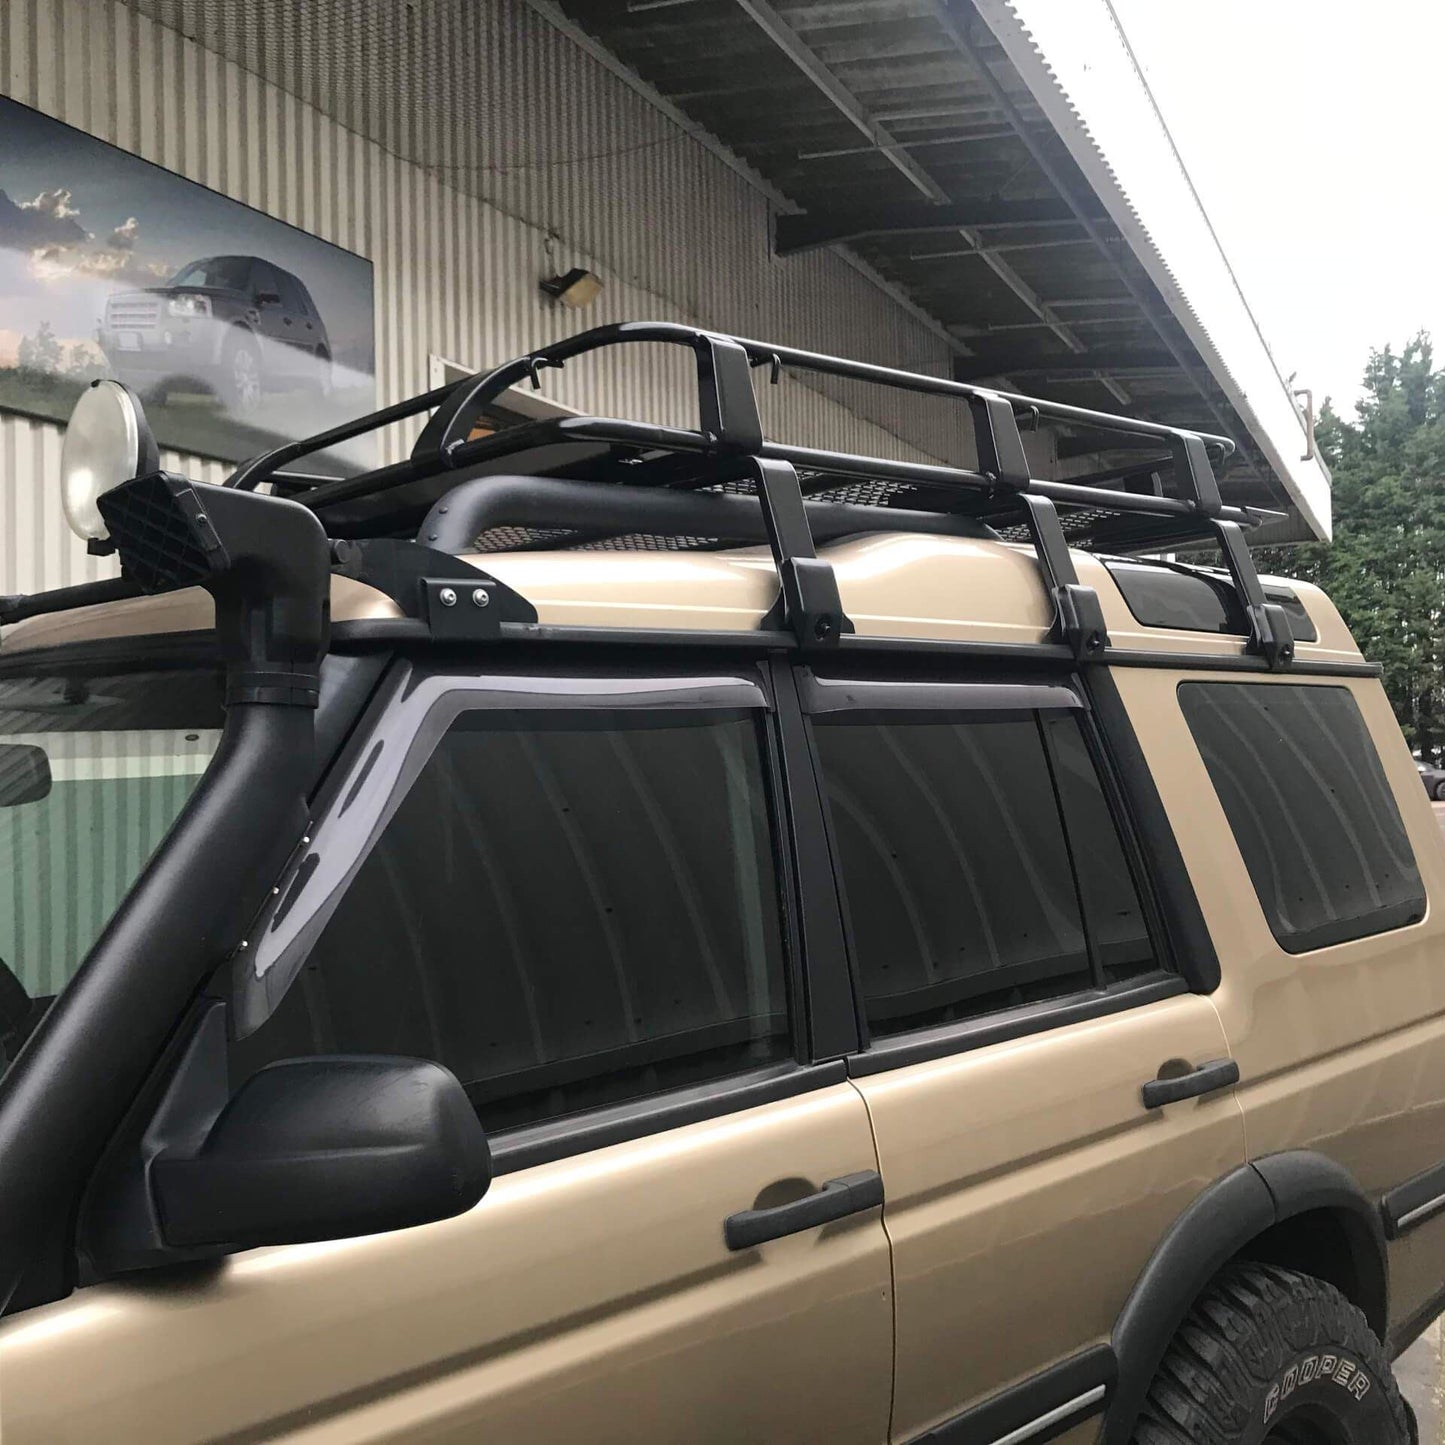 Expedition Steel Full Basket Roof Rack for Land Rover Discovery 1 and 2